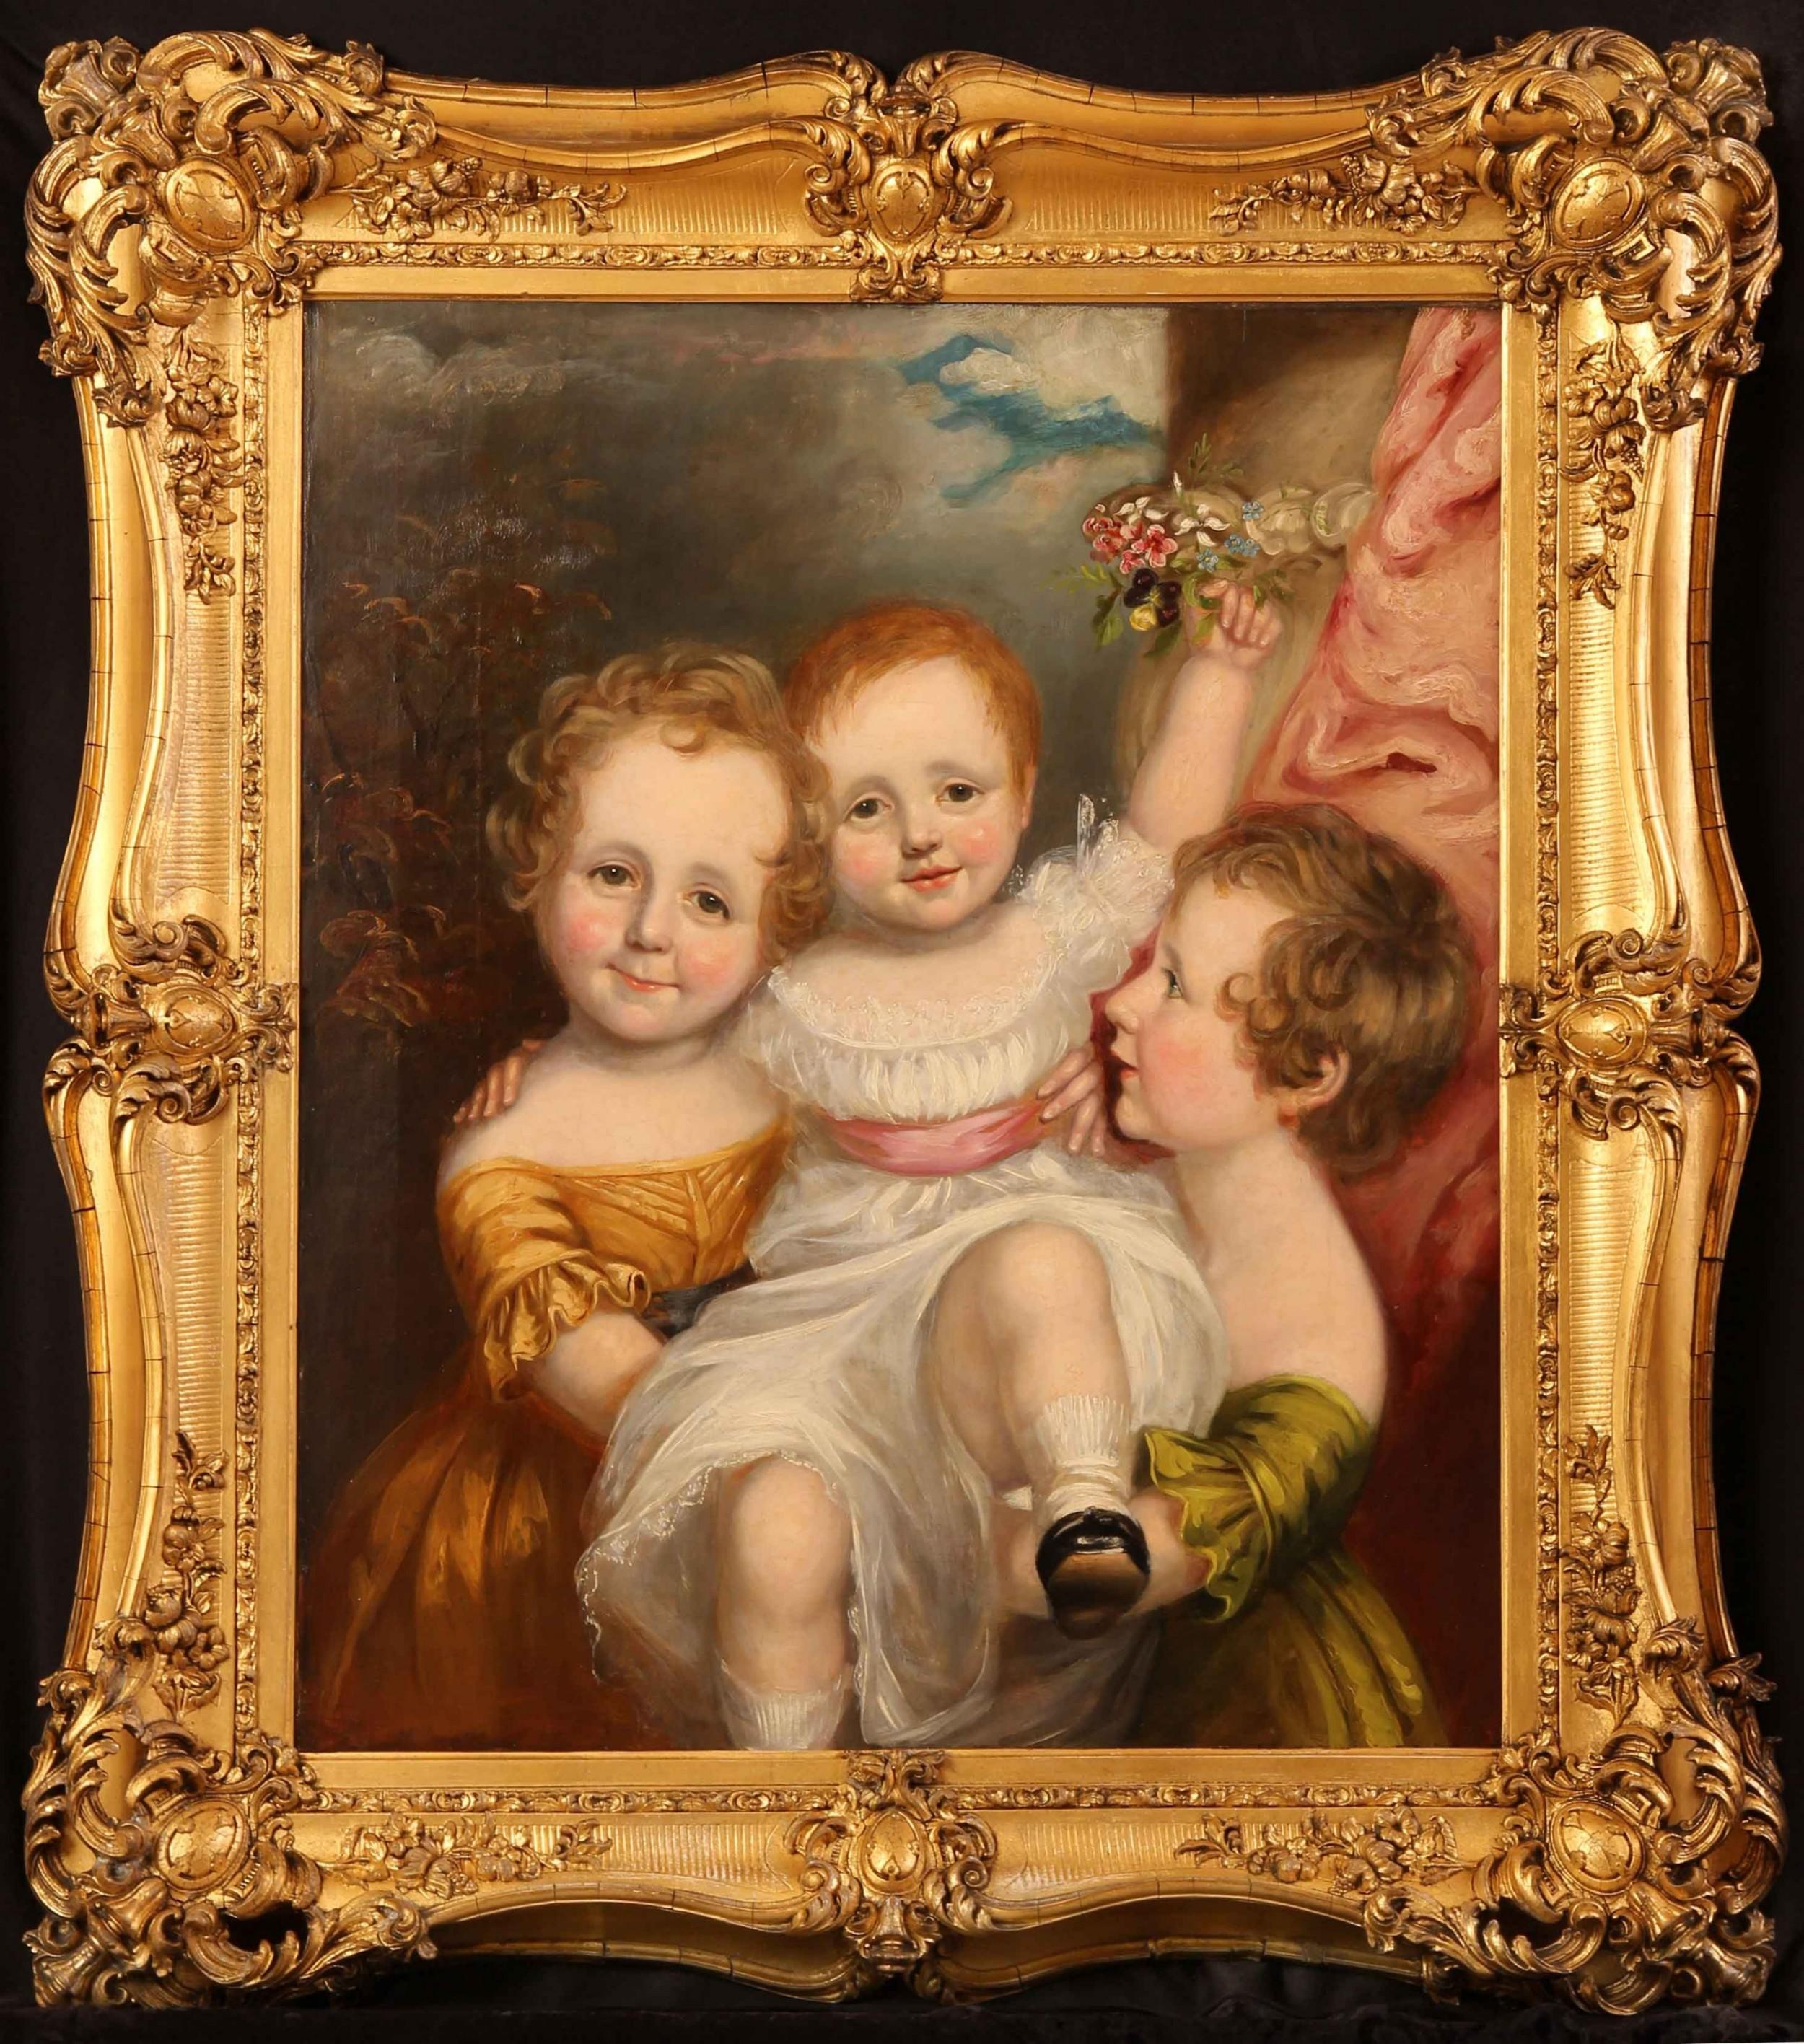 This is a beautiful large scale oil painting on canvas depicting three young angelic looking children,
studio of  artist Sir Thomas Lawrence and attributed to one of his pupils produced under his influence.

Lawrence is well known for producing a